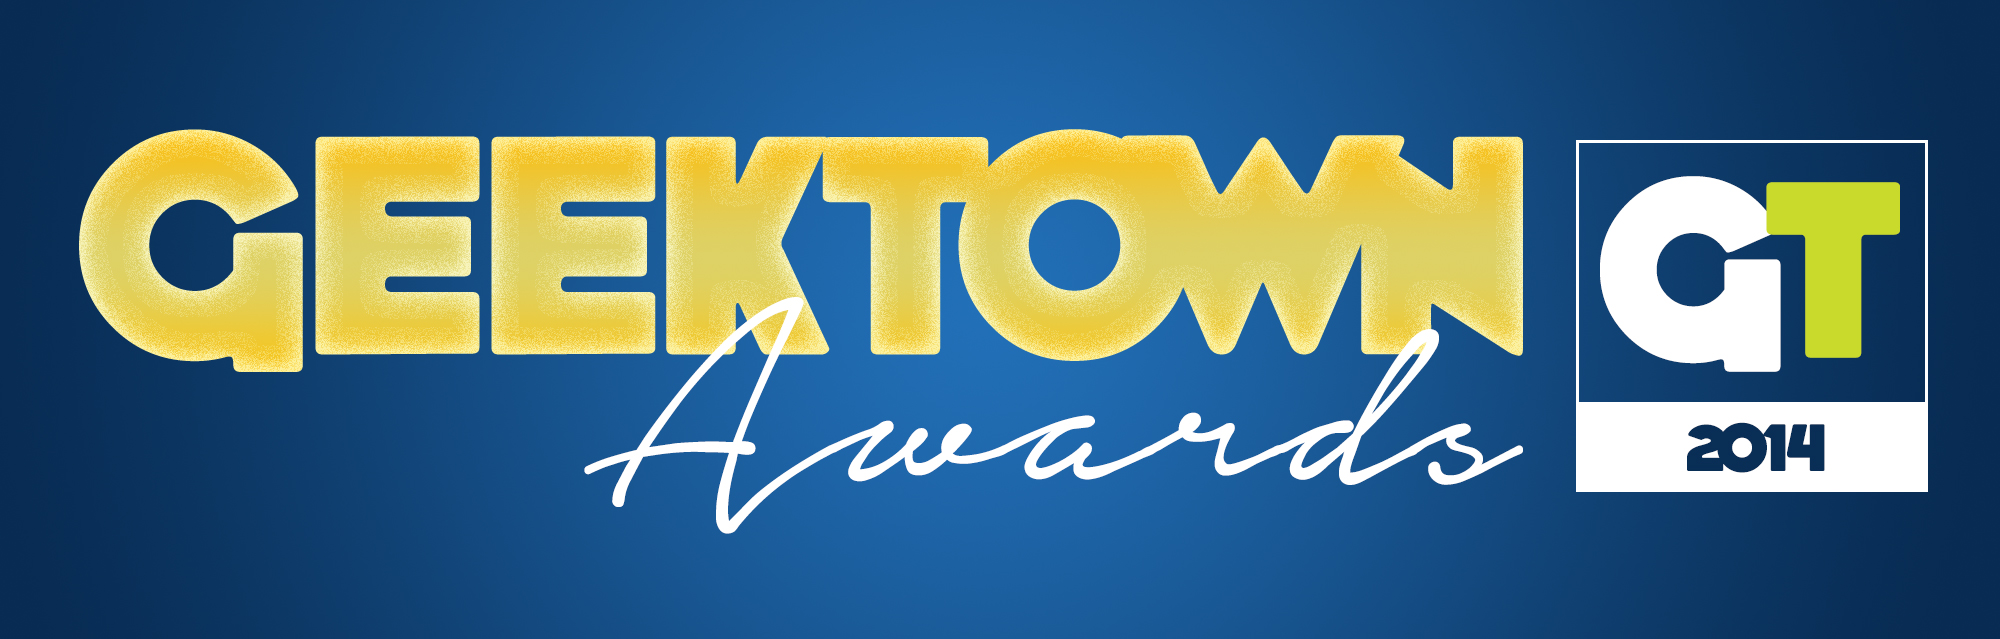 The 3rd Annual Geektown Awards!